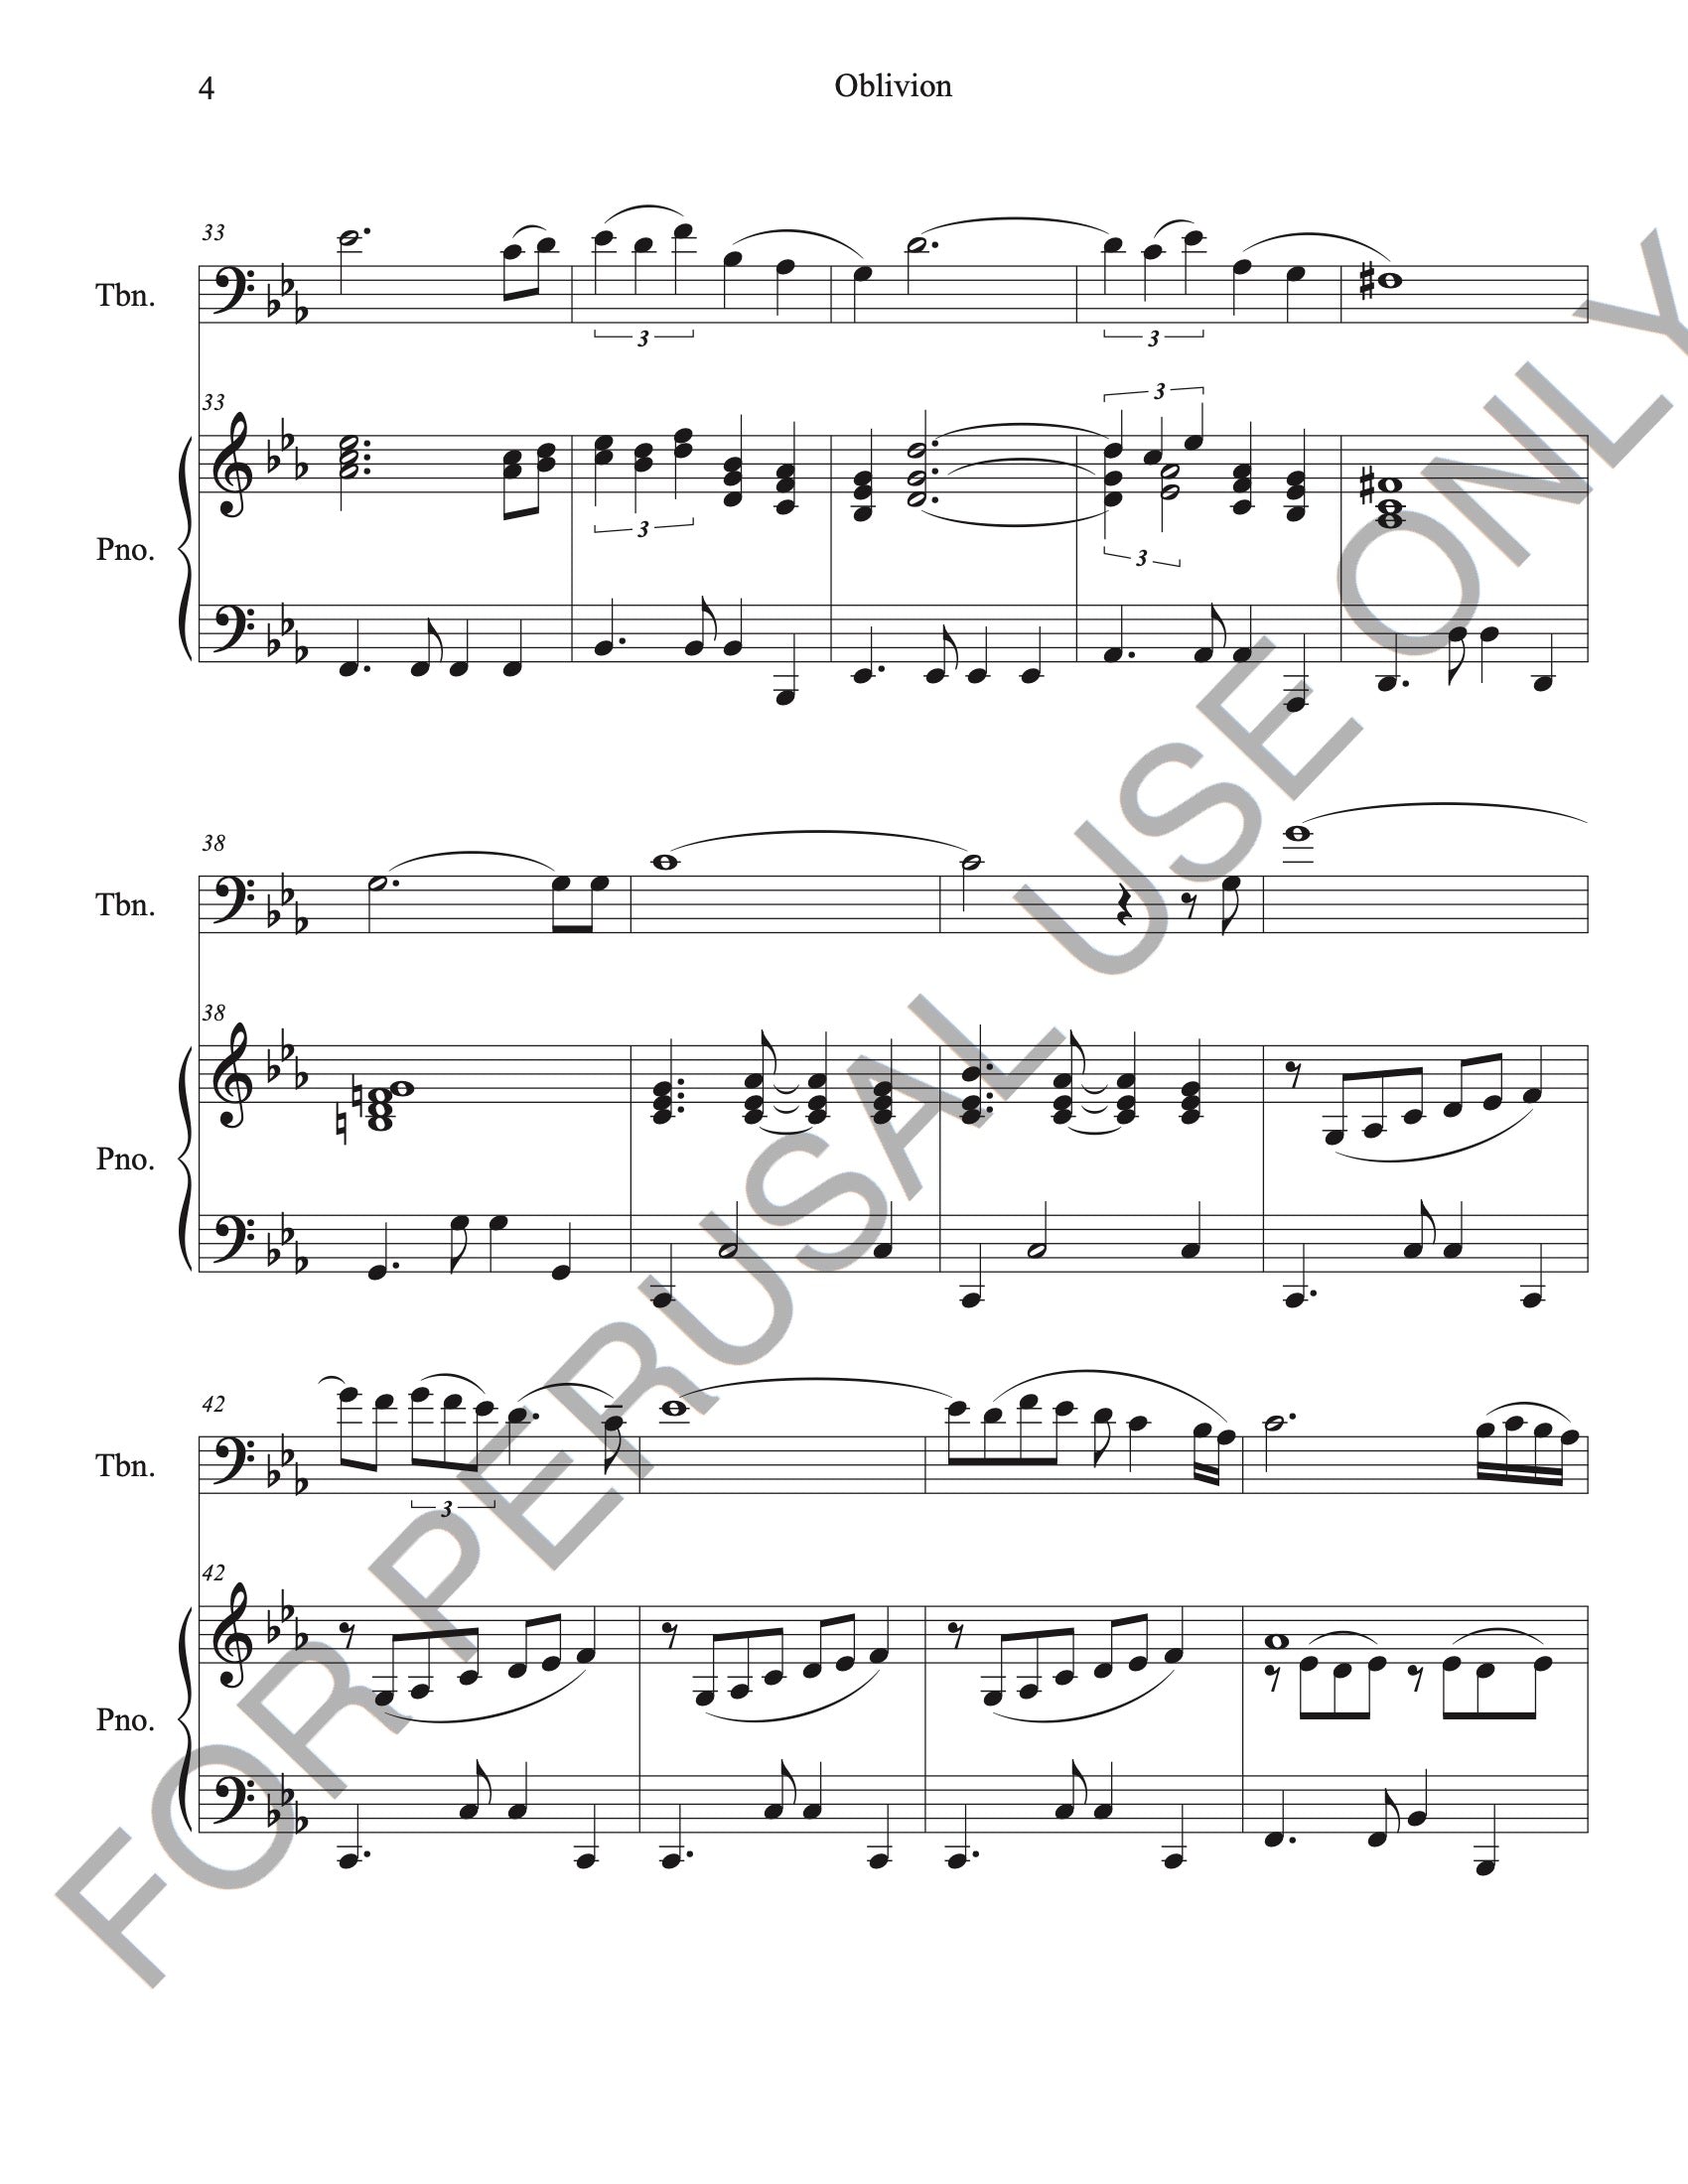 Oblivion for Trombone and Piano by Astor Piazzolla (Score+Parts+mp3)